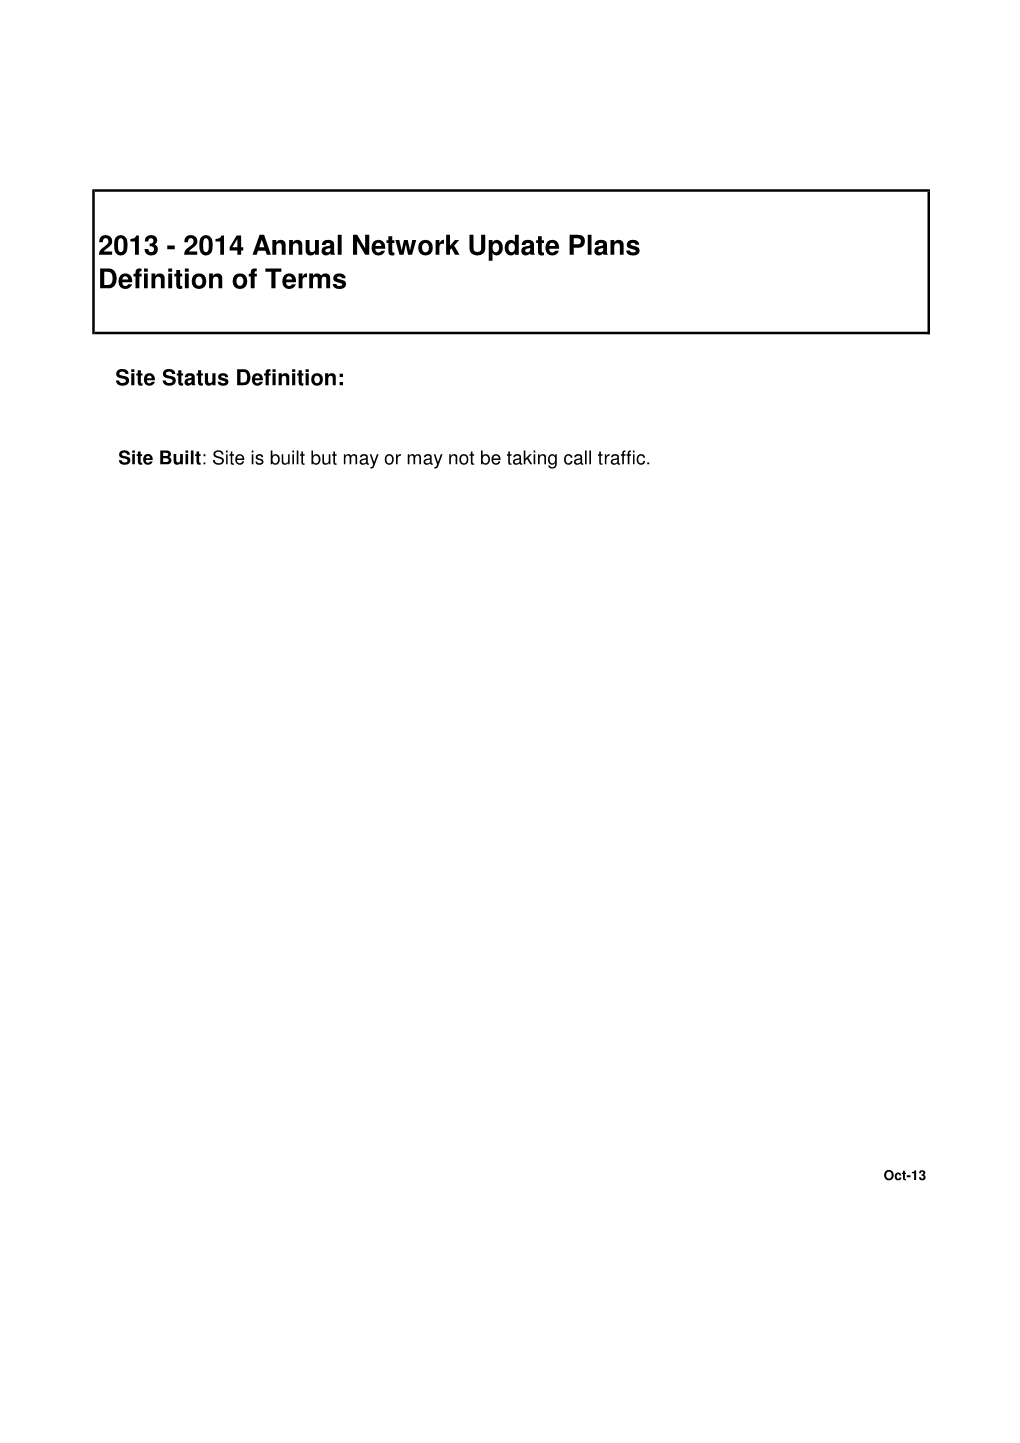 2013 - 2014 Annual Network Update Plans Definition of Terms